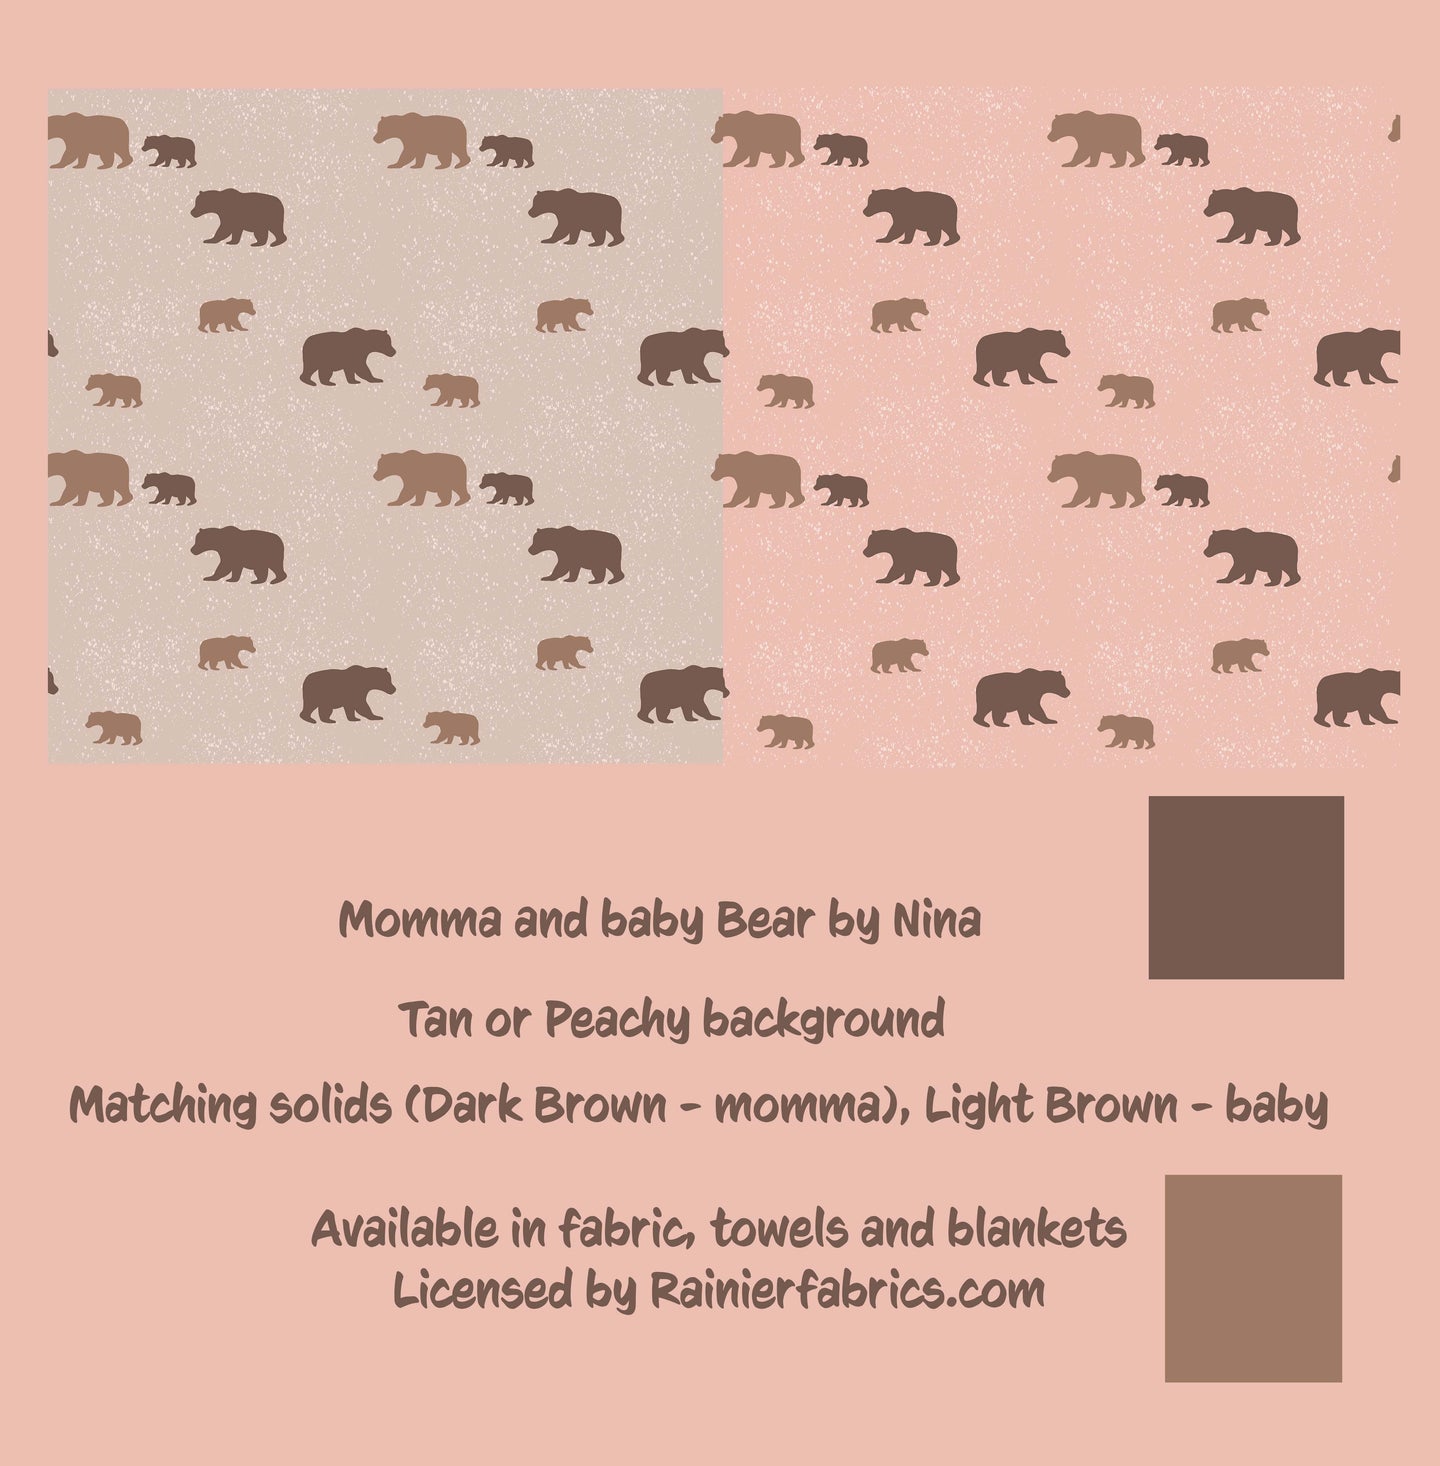 Boho-Chic Collection ~ Momma and Baby Bear - from Nina  - 2-5 day turnaround - Order by 1/2 yard; Description of bases below